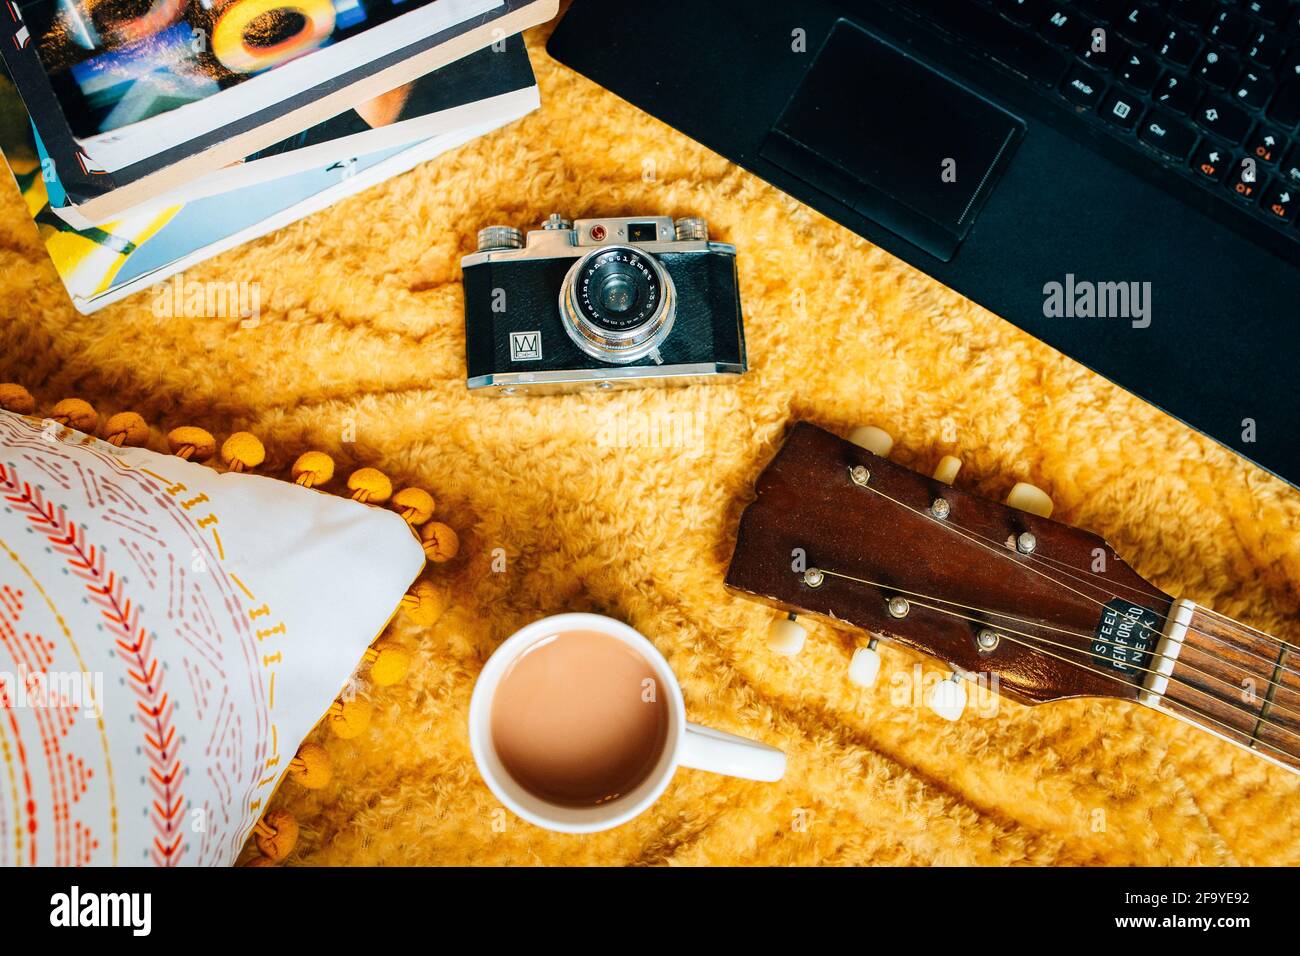 Still life, lay flat of a cosy home scene. A blanket on the floor with a guitar, vintage film camera, books and tea . Creative freelancer lifestyle Stock Photo